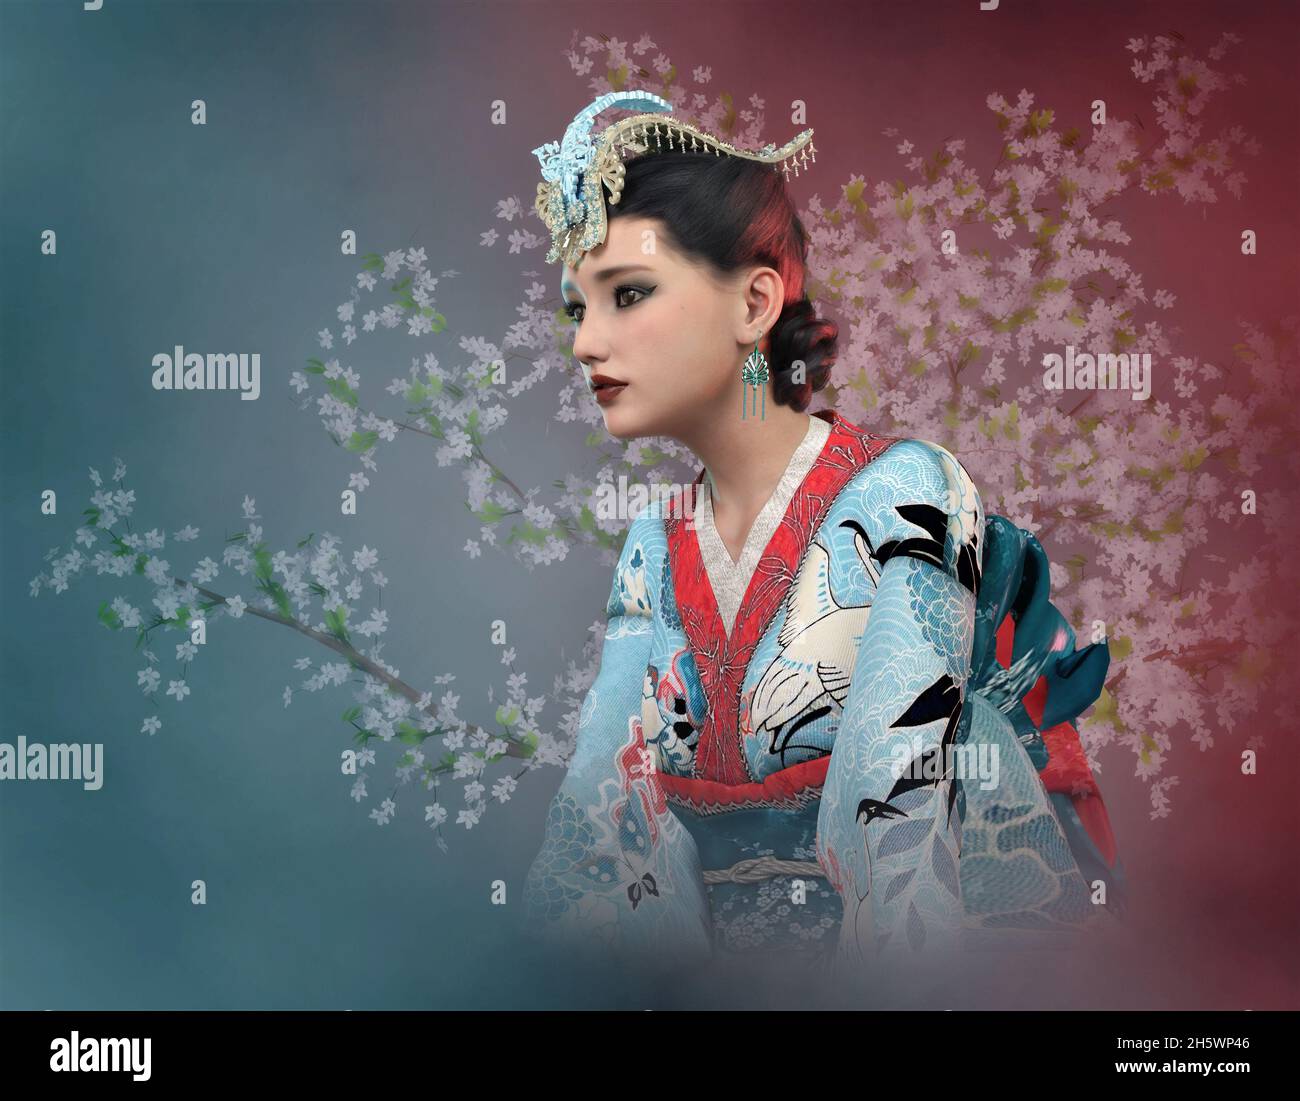 3d computer graphics of a girl with kimono and cherry blossom in the background Stock Photo